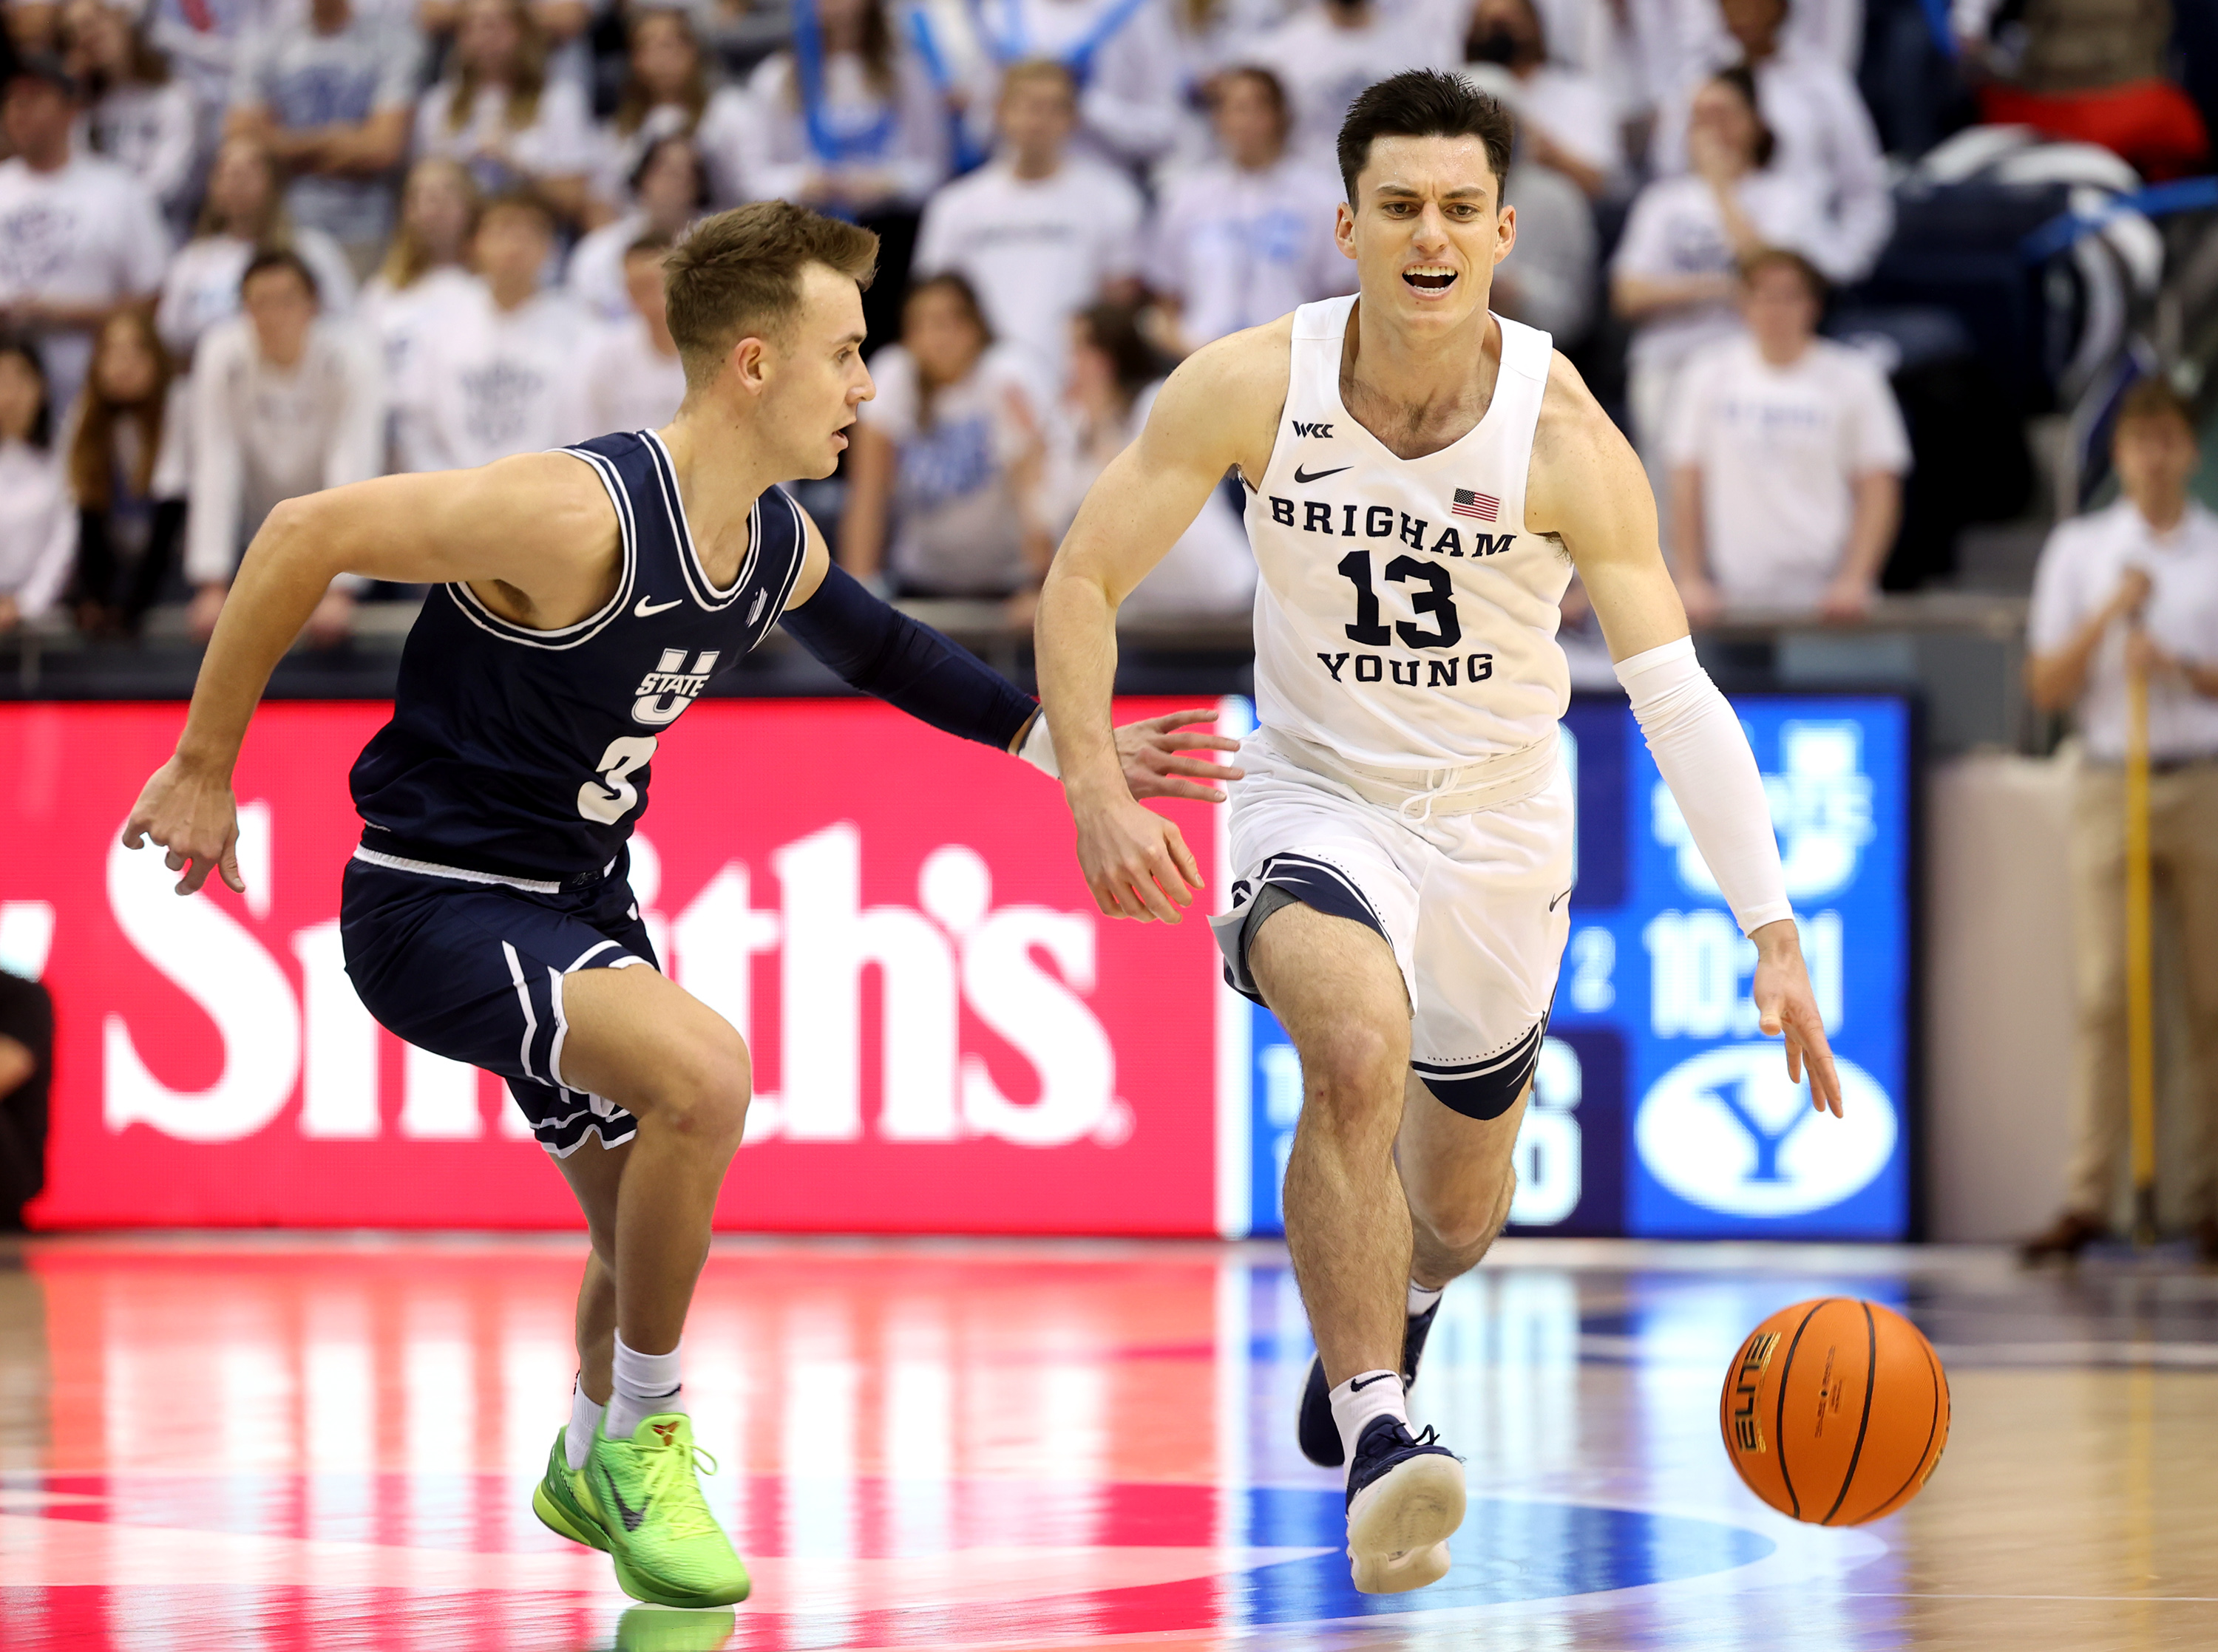 BYU guard Alex Barcello brings the ball up court during game against Utah State in Provo on Wednesday, Dec. 8, 2021.